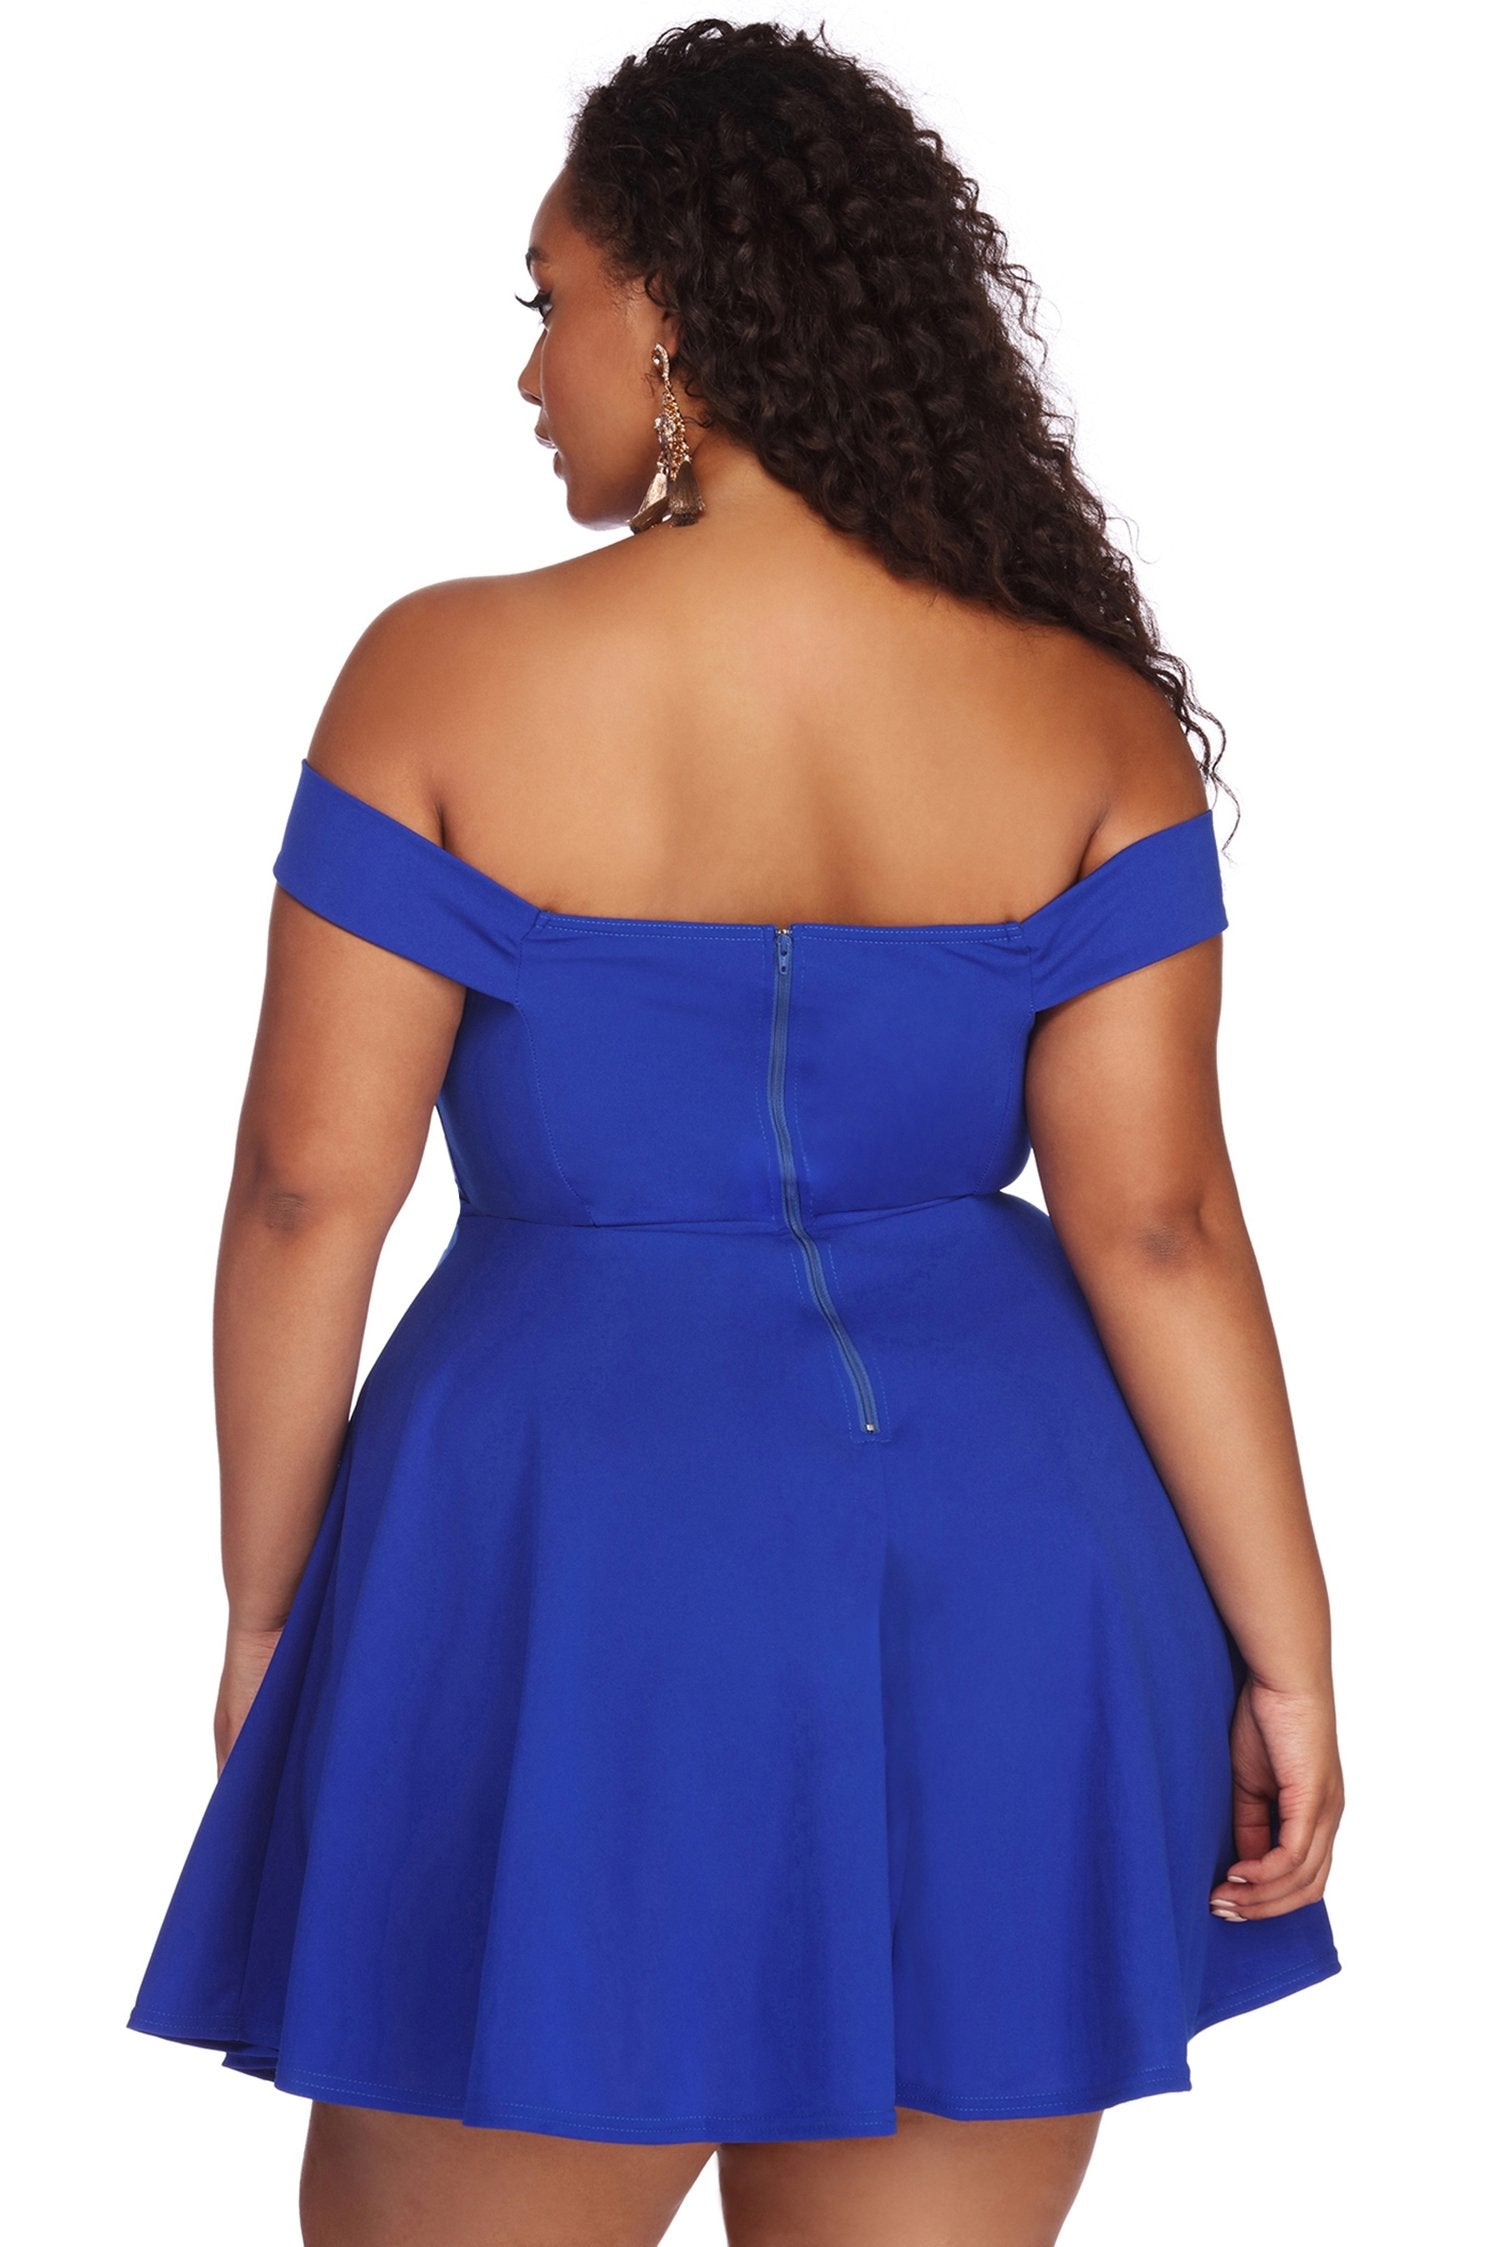 Plus Charming Sweetheart Skater Dress - Lady Occasions